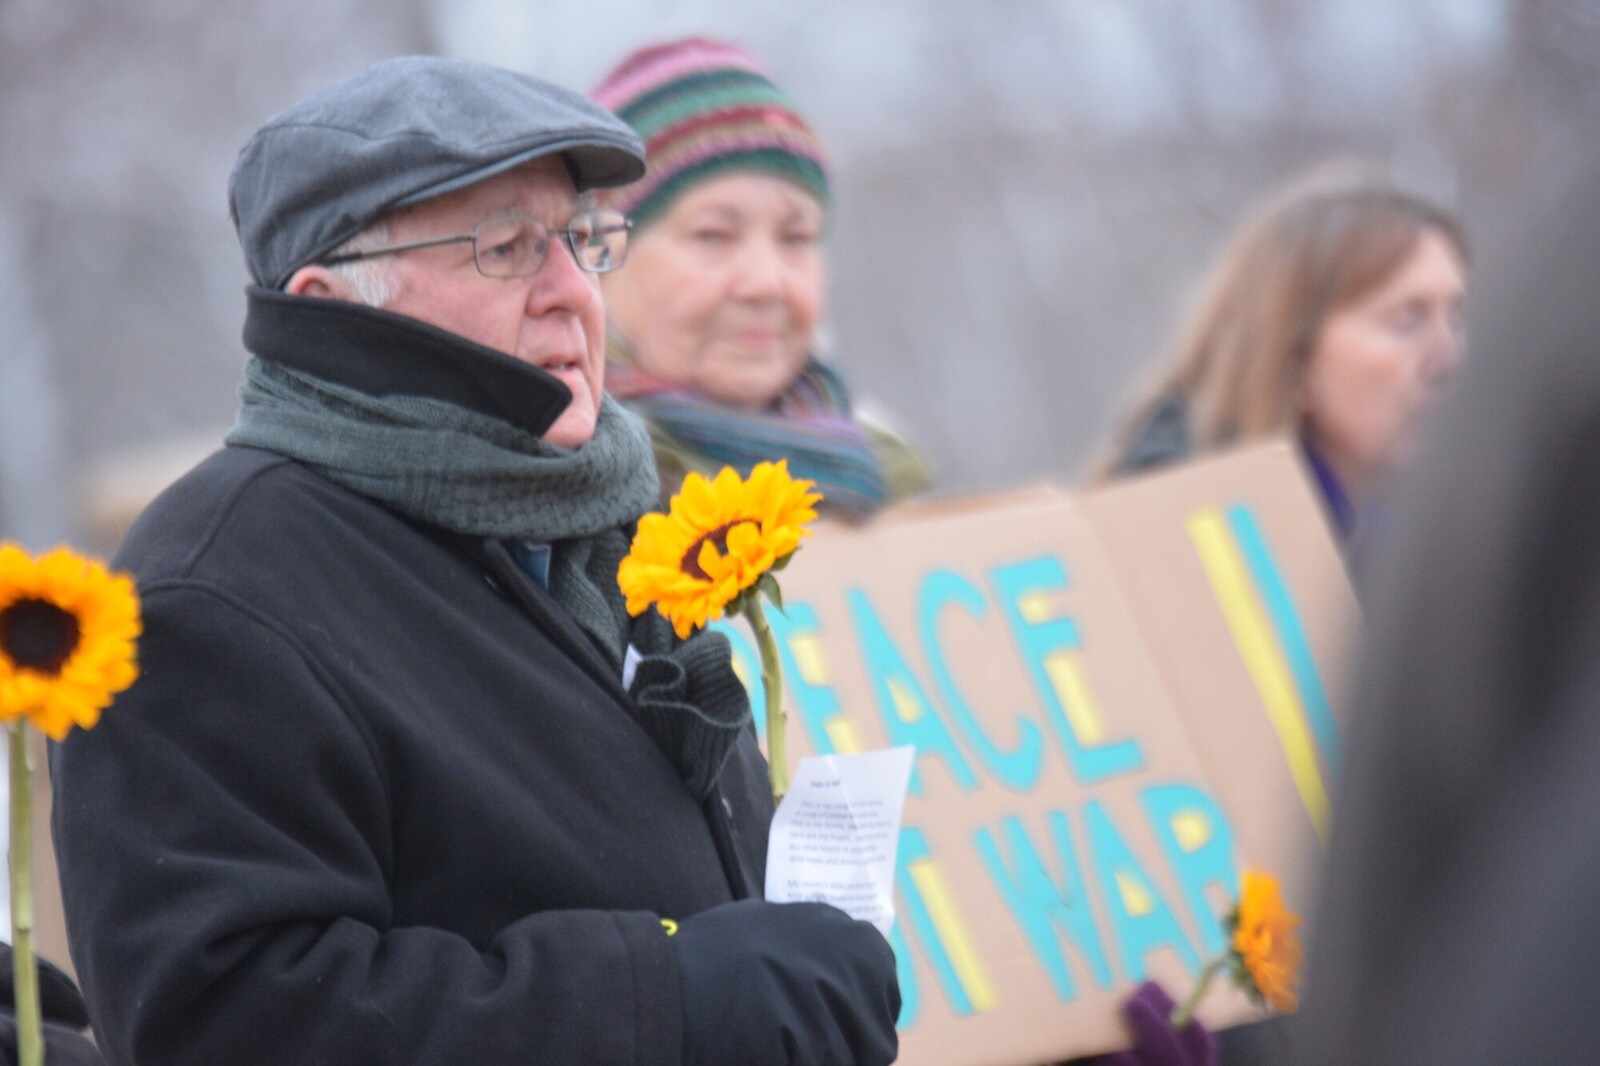 Man holding sunflower at prayer vigil for peace in Ukraine and beyond 